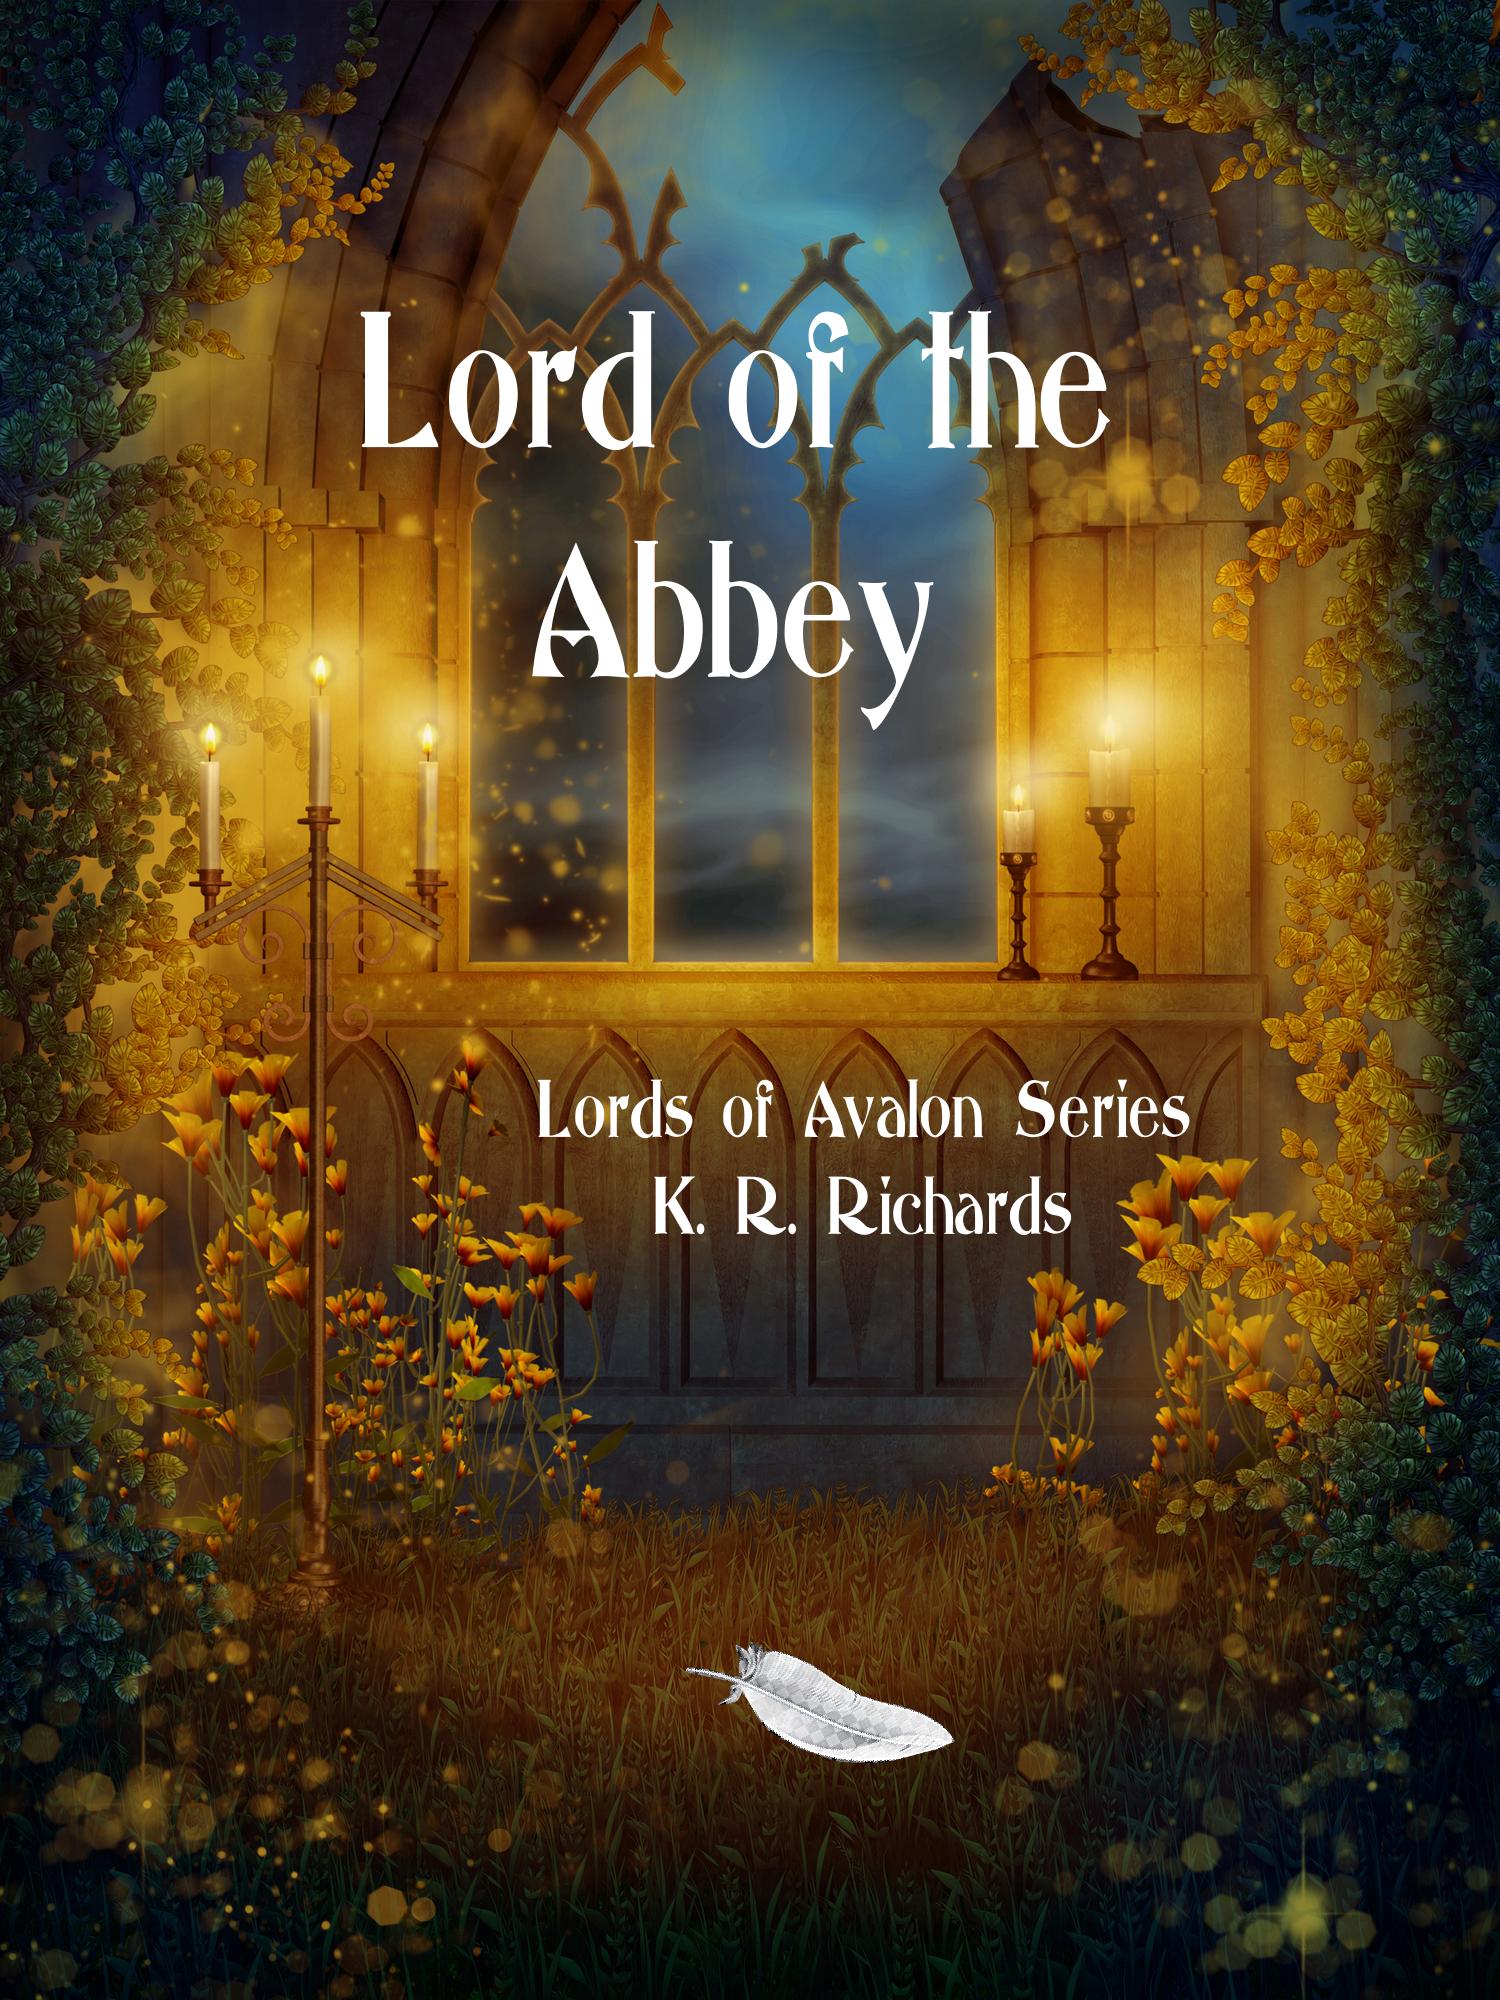 FREE: Lord of the Abbey by K. R. Richards